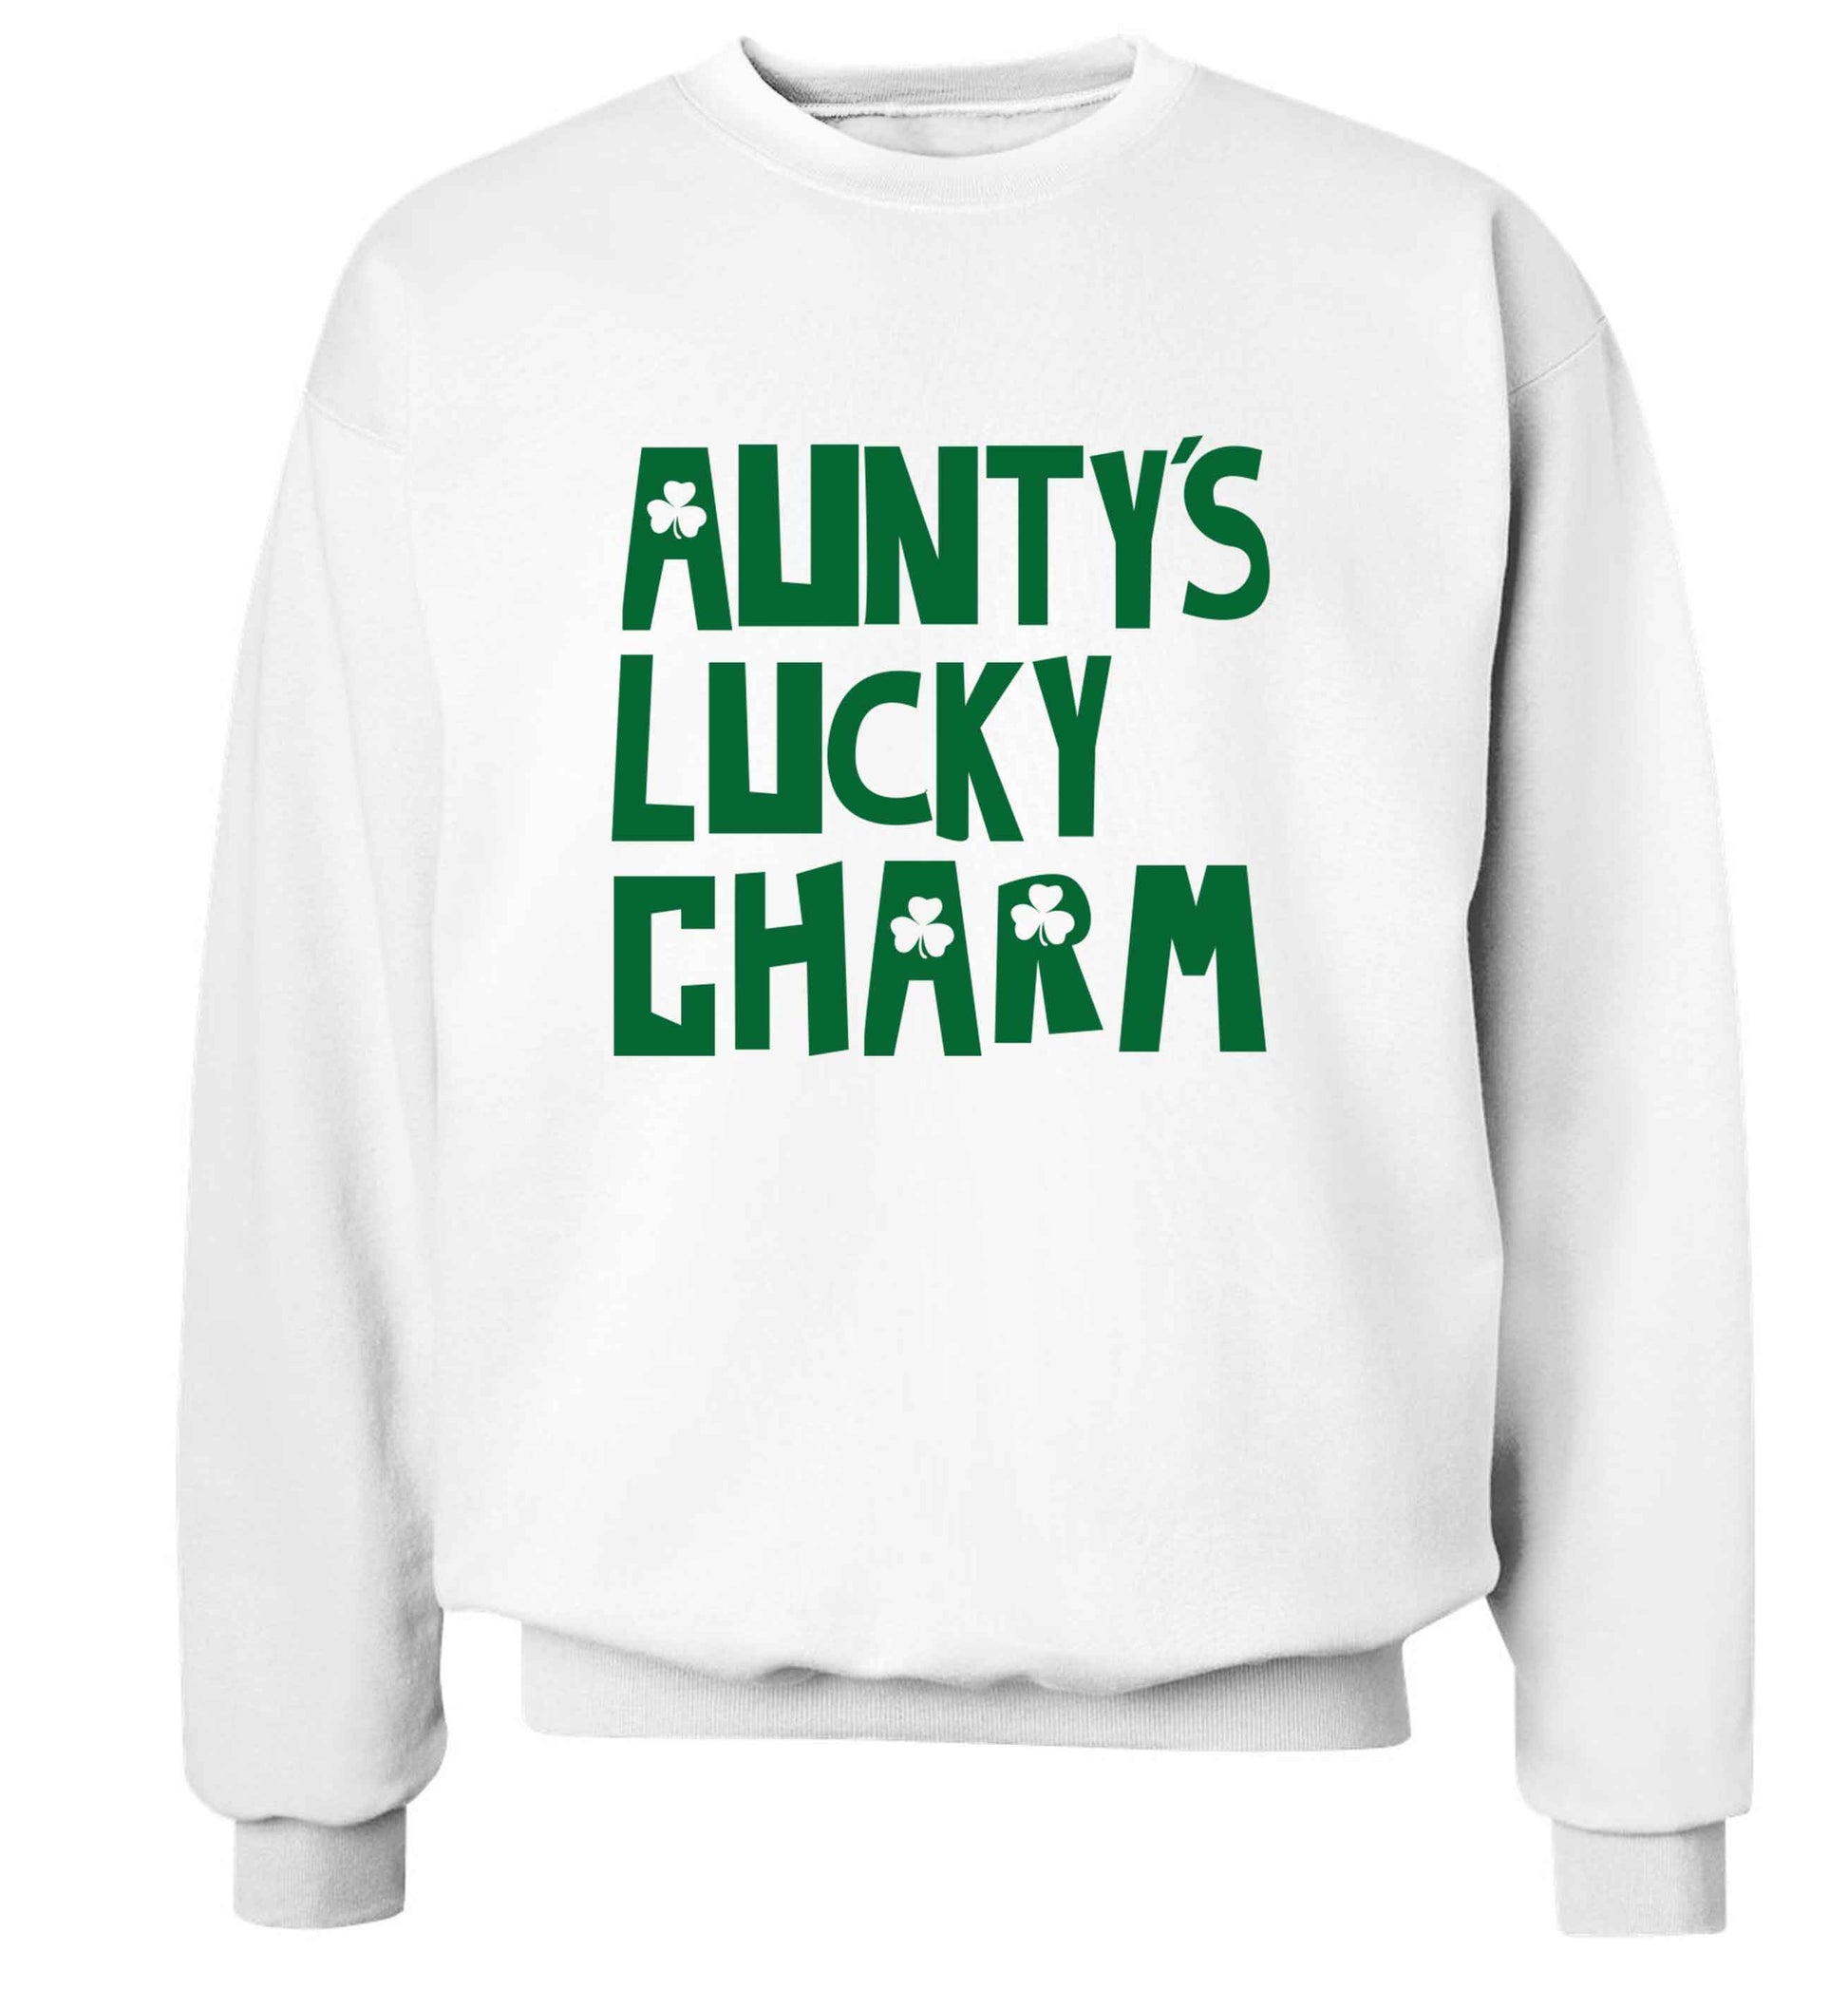 Aunty's lucky charm adult's unisex white sweater 2XL